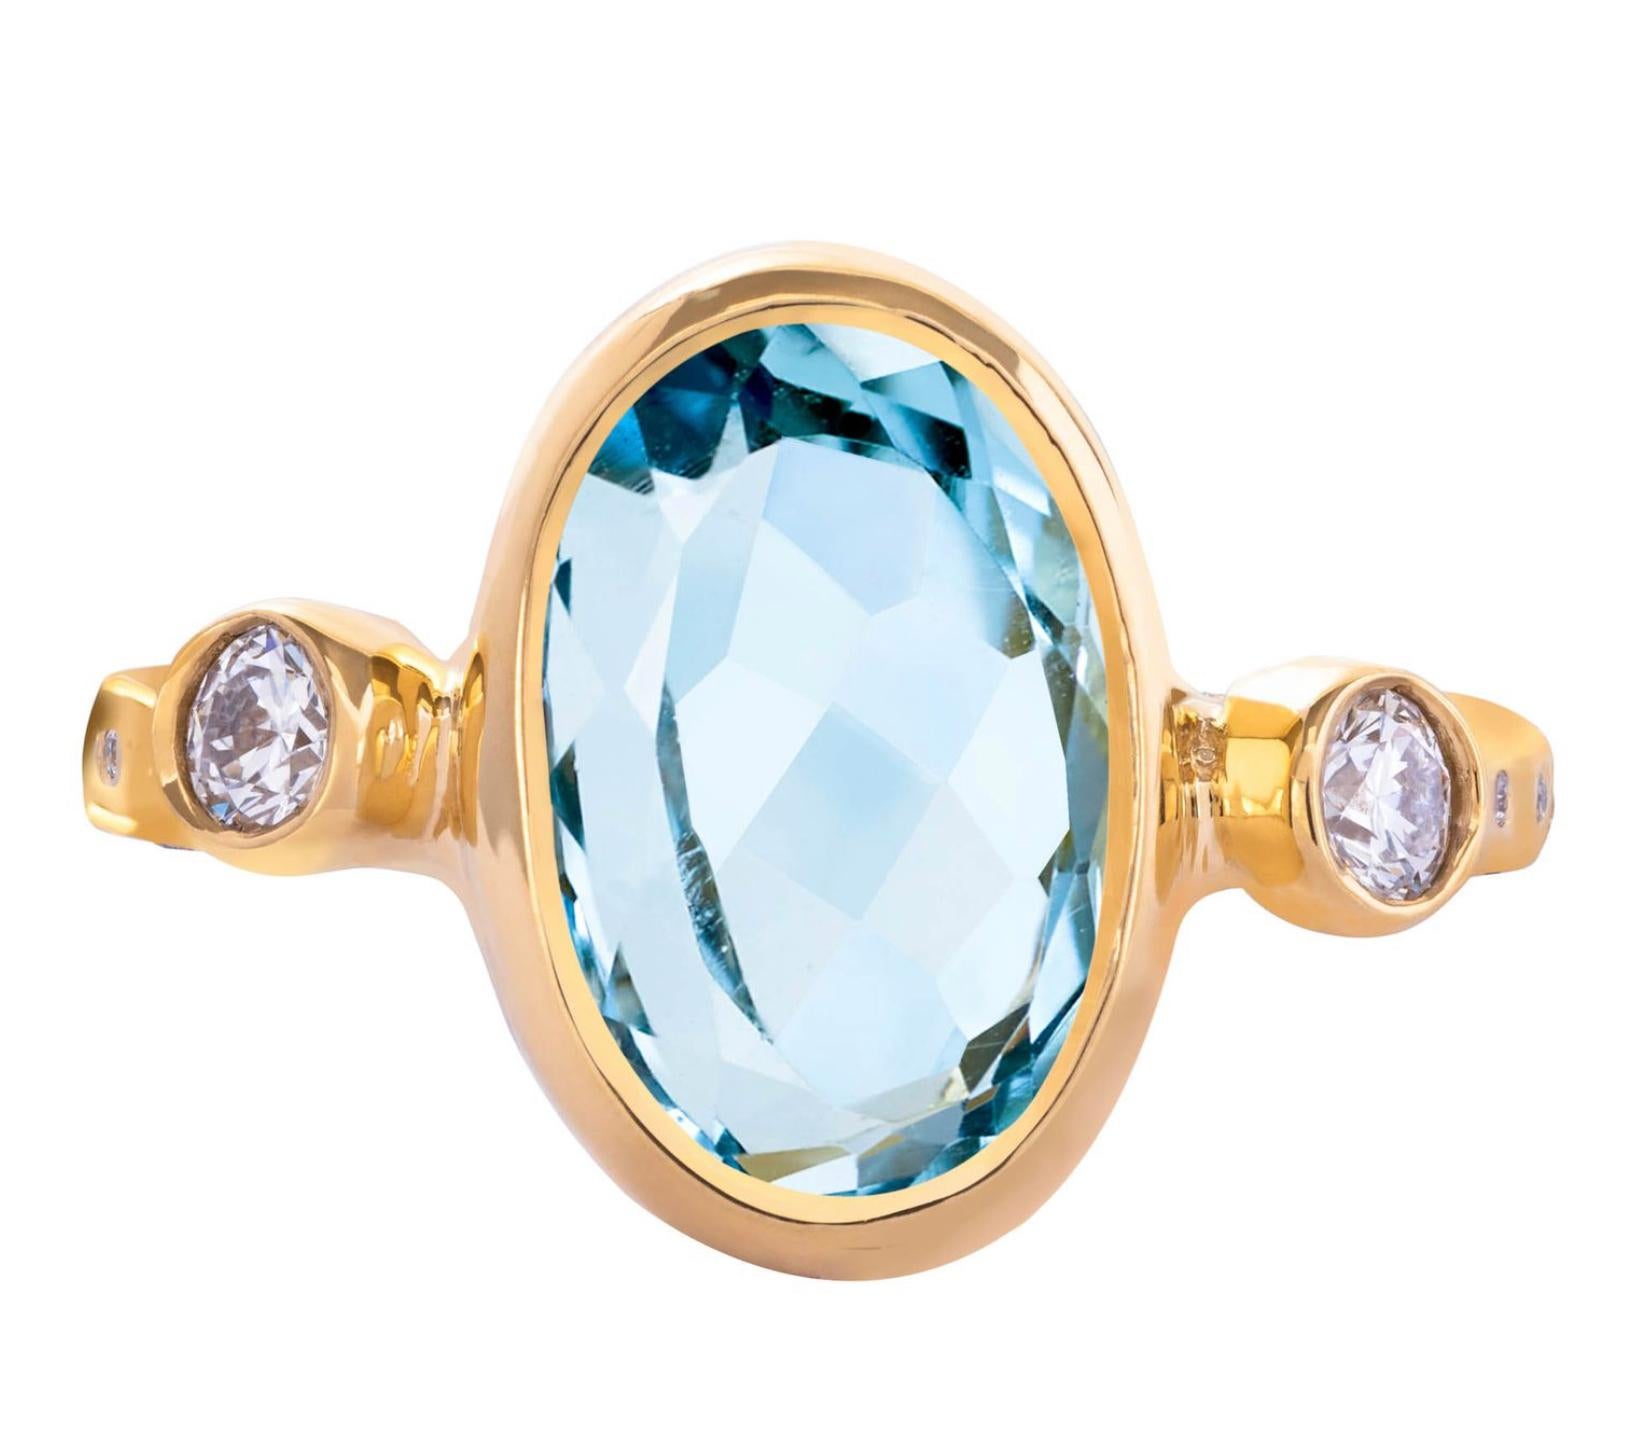 From the Tale of Five Rings Collection, this 22K gold ring has a stunning 4.11 carat aquamarine center stone, .3mm brilliant cut side diamonds, and .8mm diamonds surrounding top and sides of the ring band. This ring is completely hand crafted and